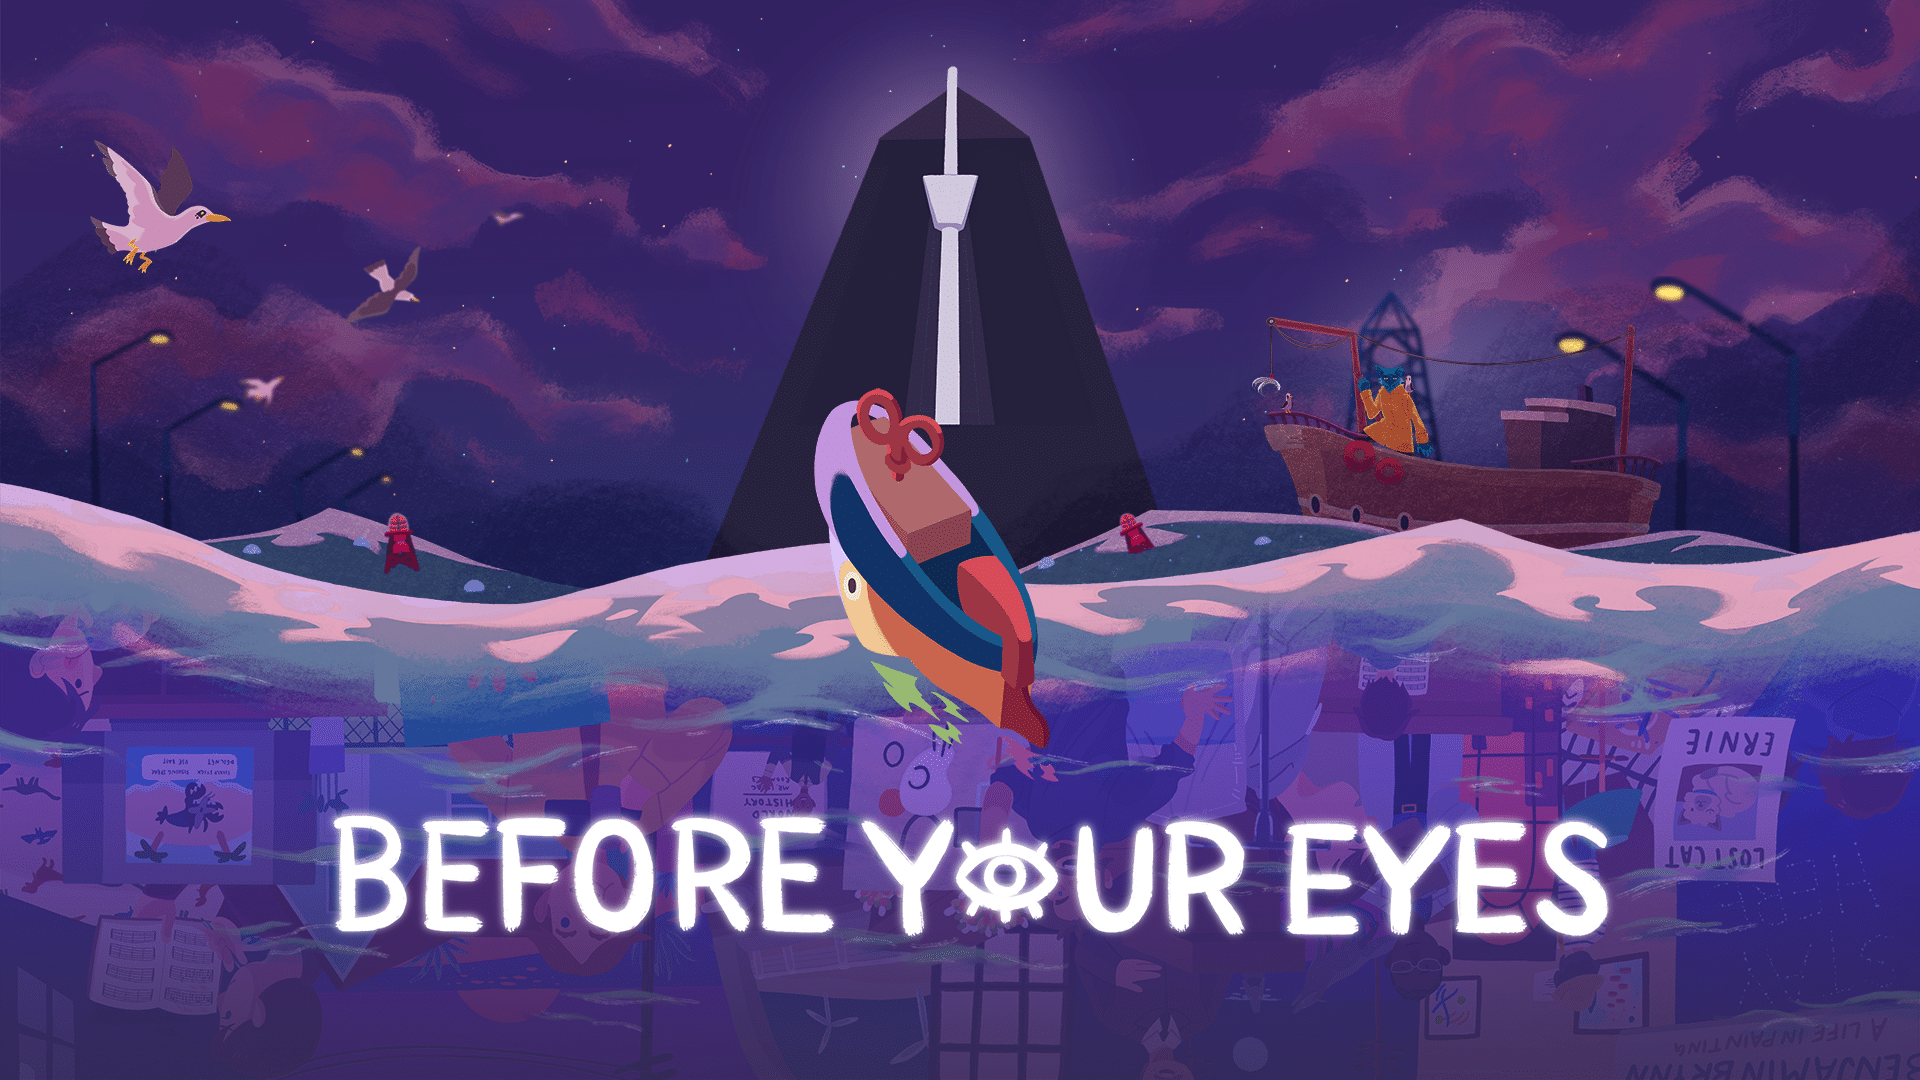 Before Your Eyes Progresses by Blinking Tracked by Your Webcam; Release Date Announced